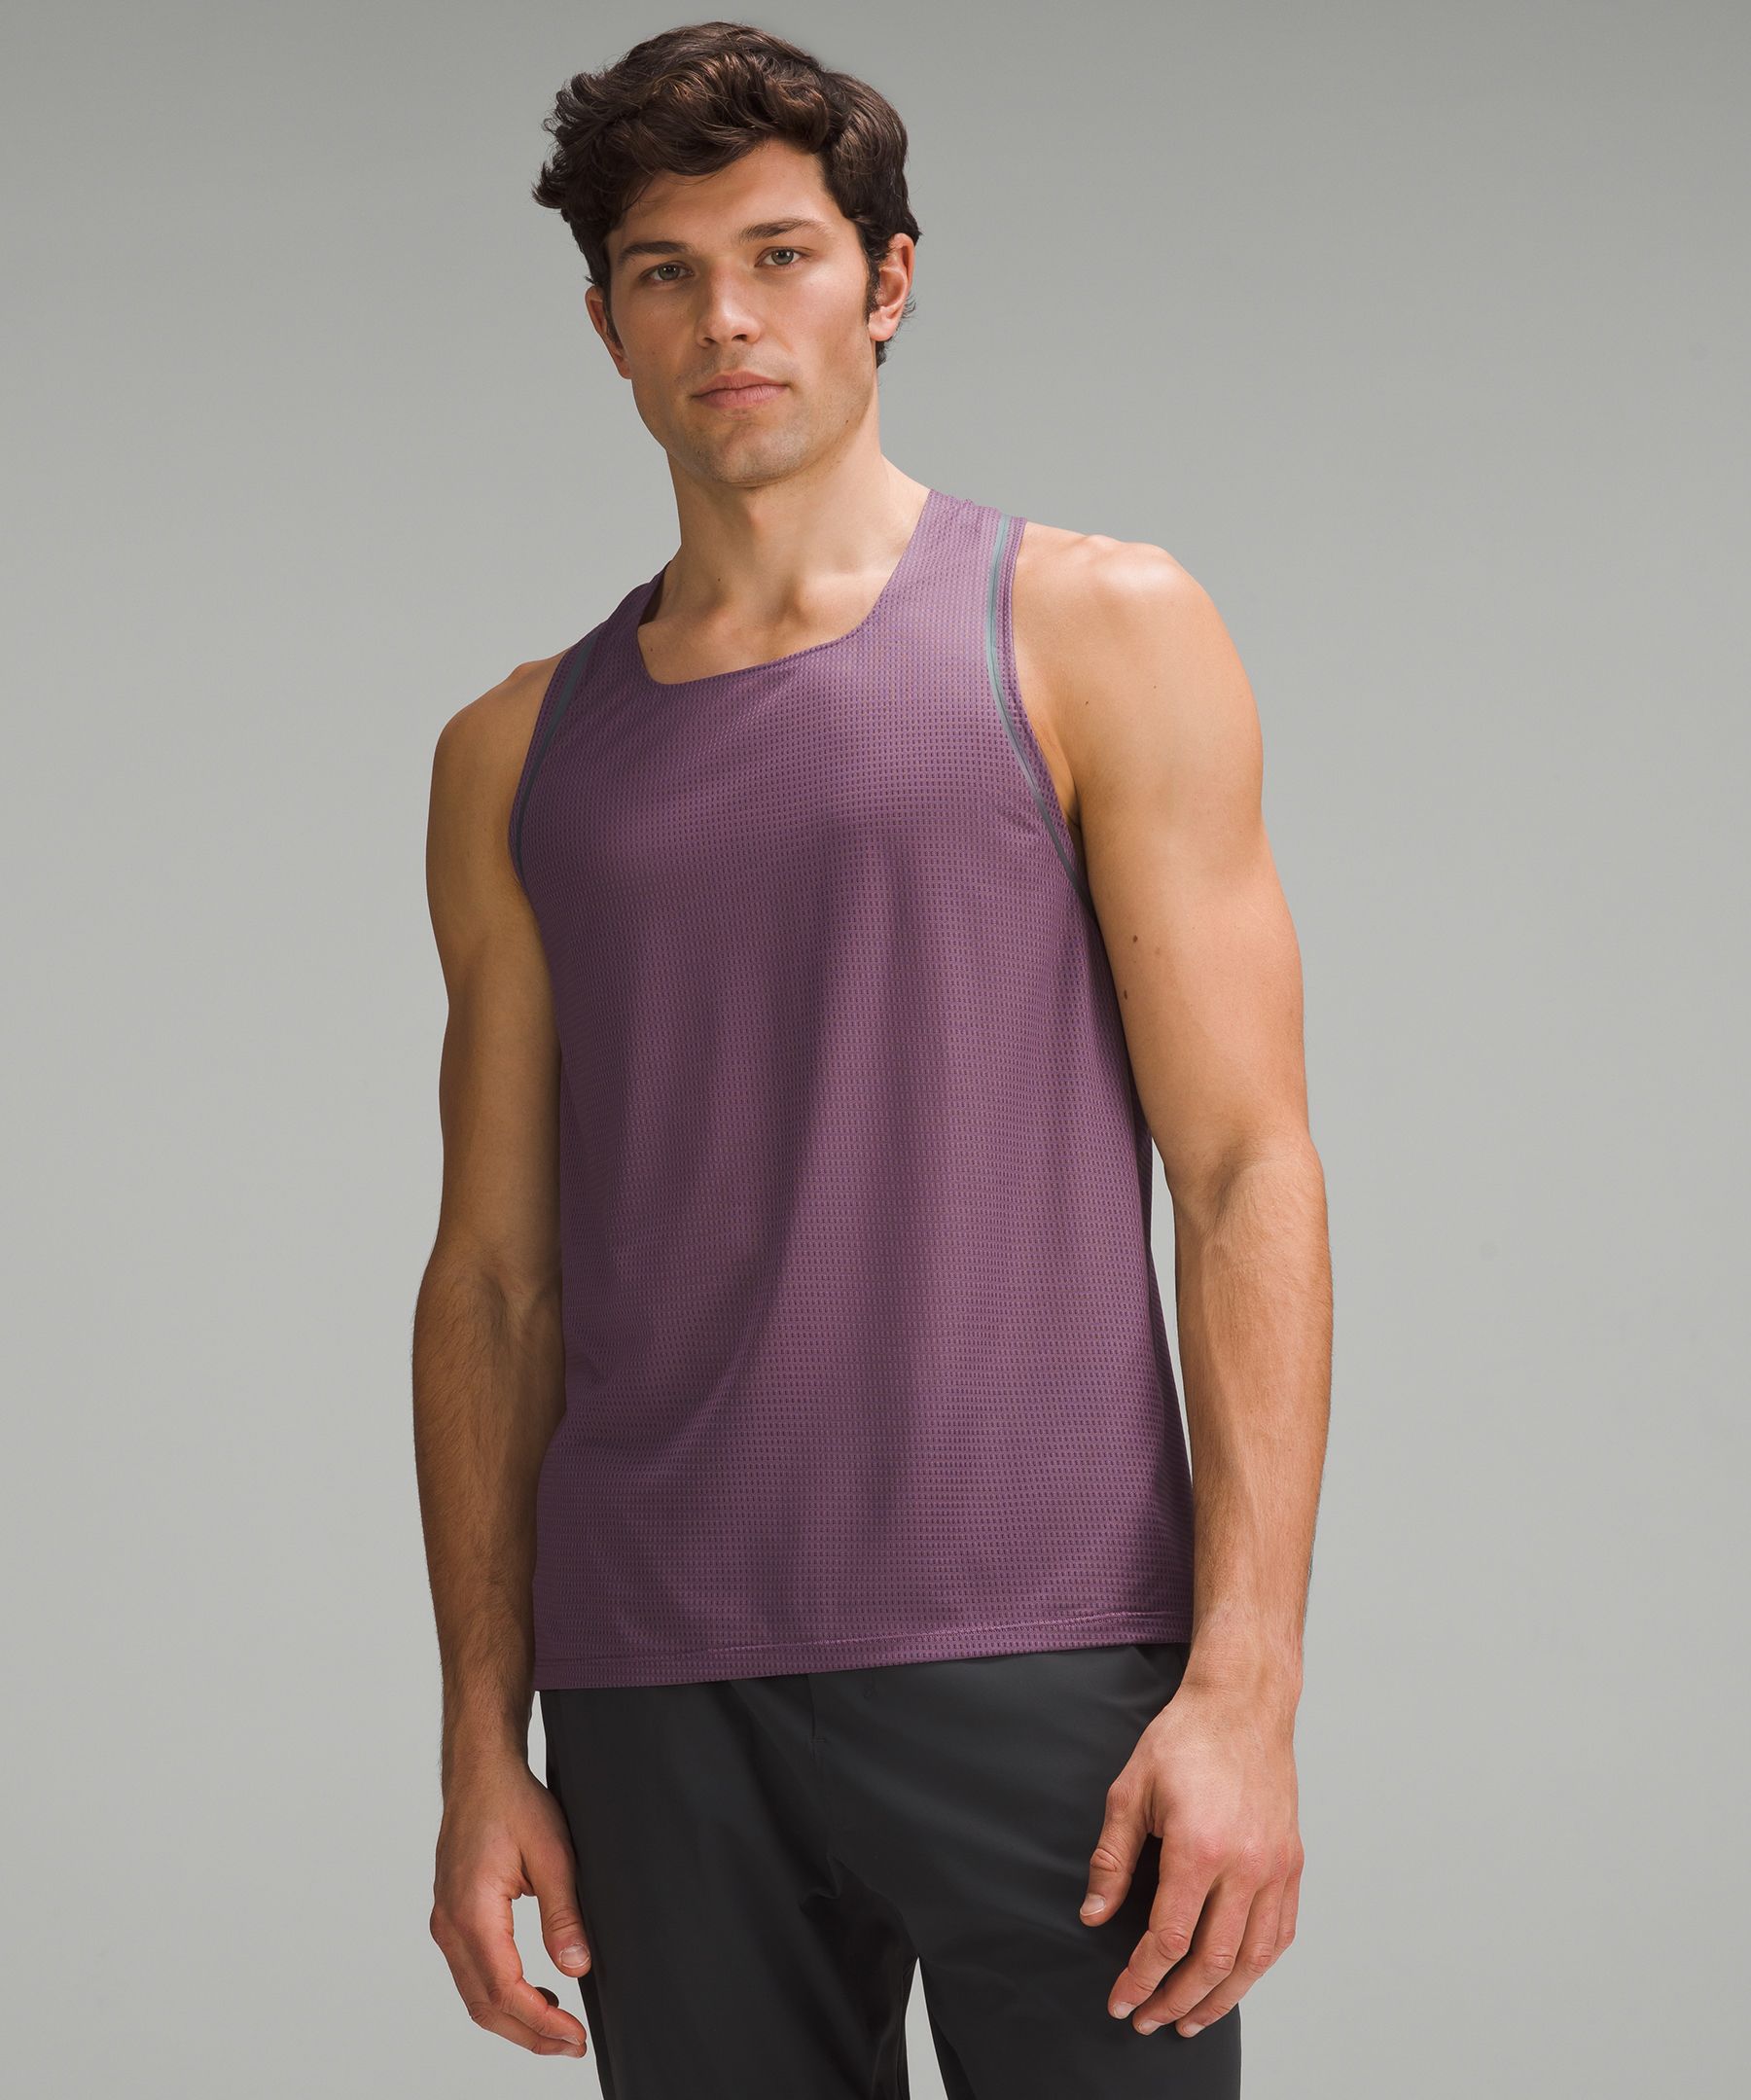 Yoga Clothes and Activewear, The Official Site